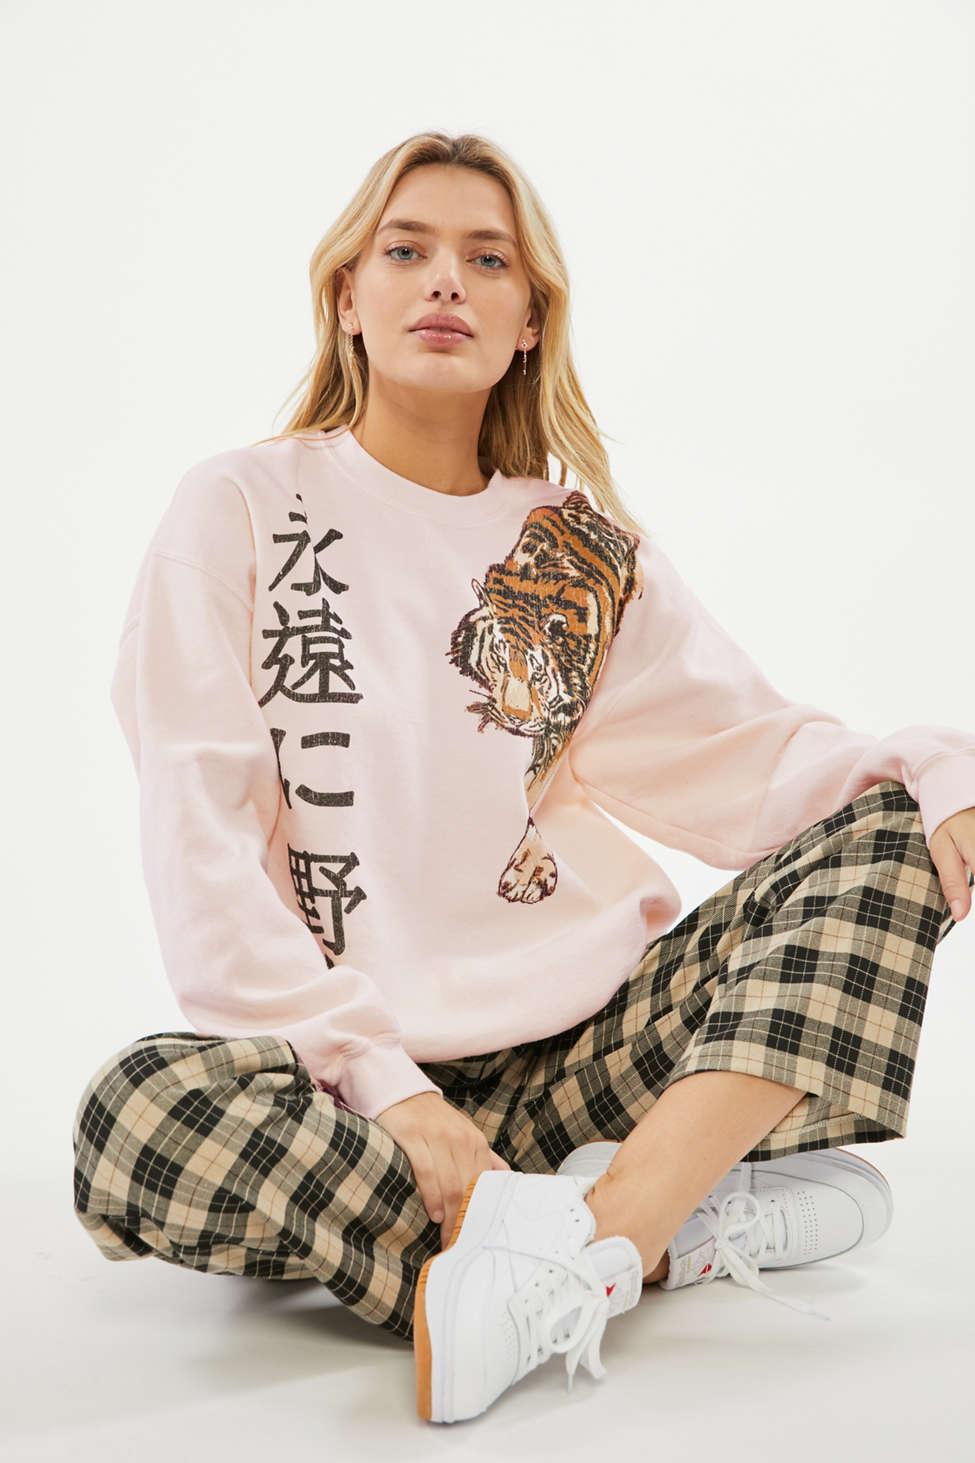 Urban Outfitters Tiger Sweatshirt Sale SAVE - mpgc.net